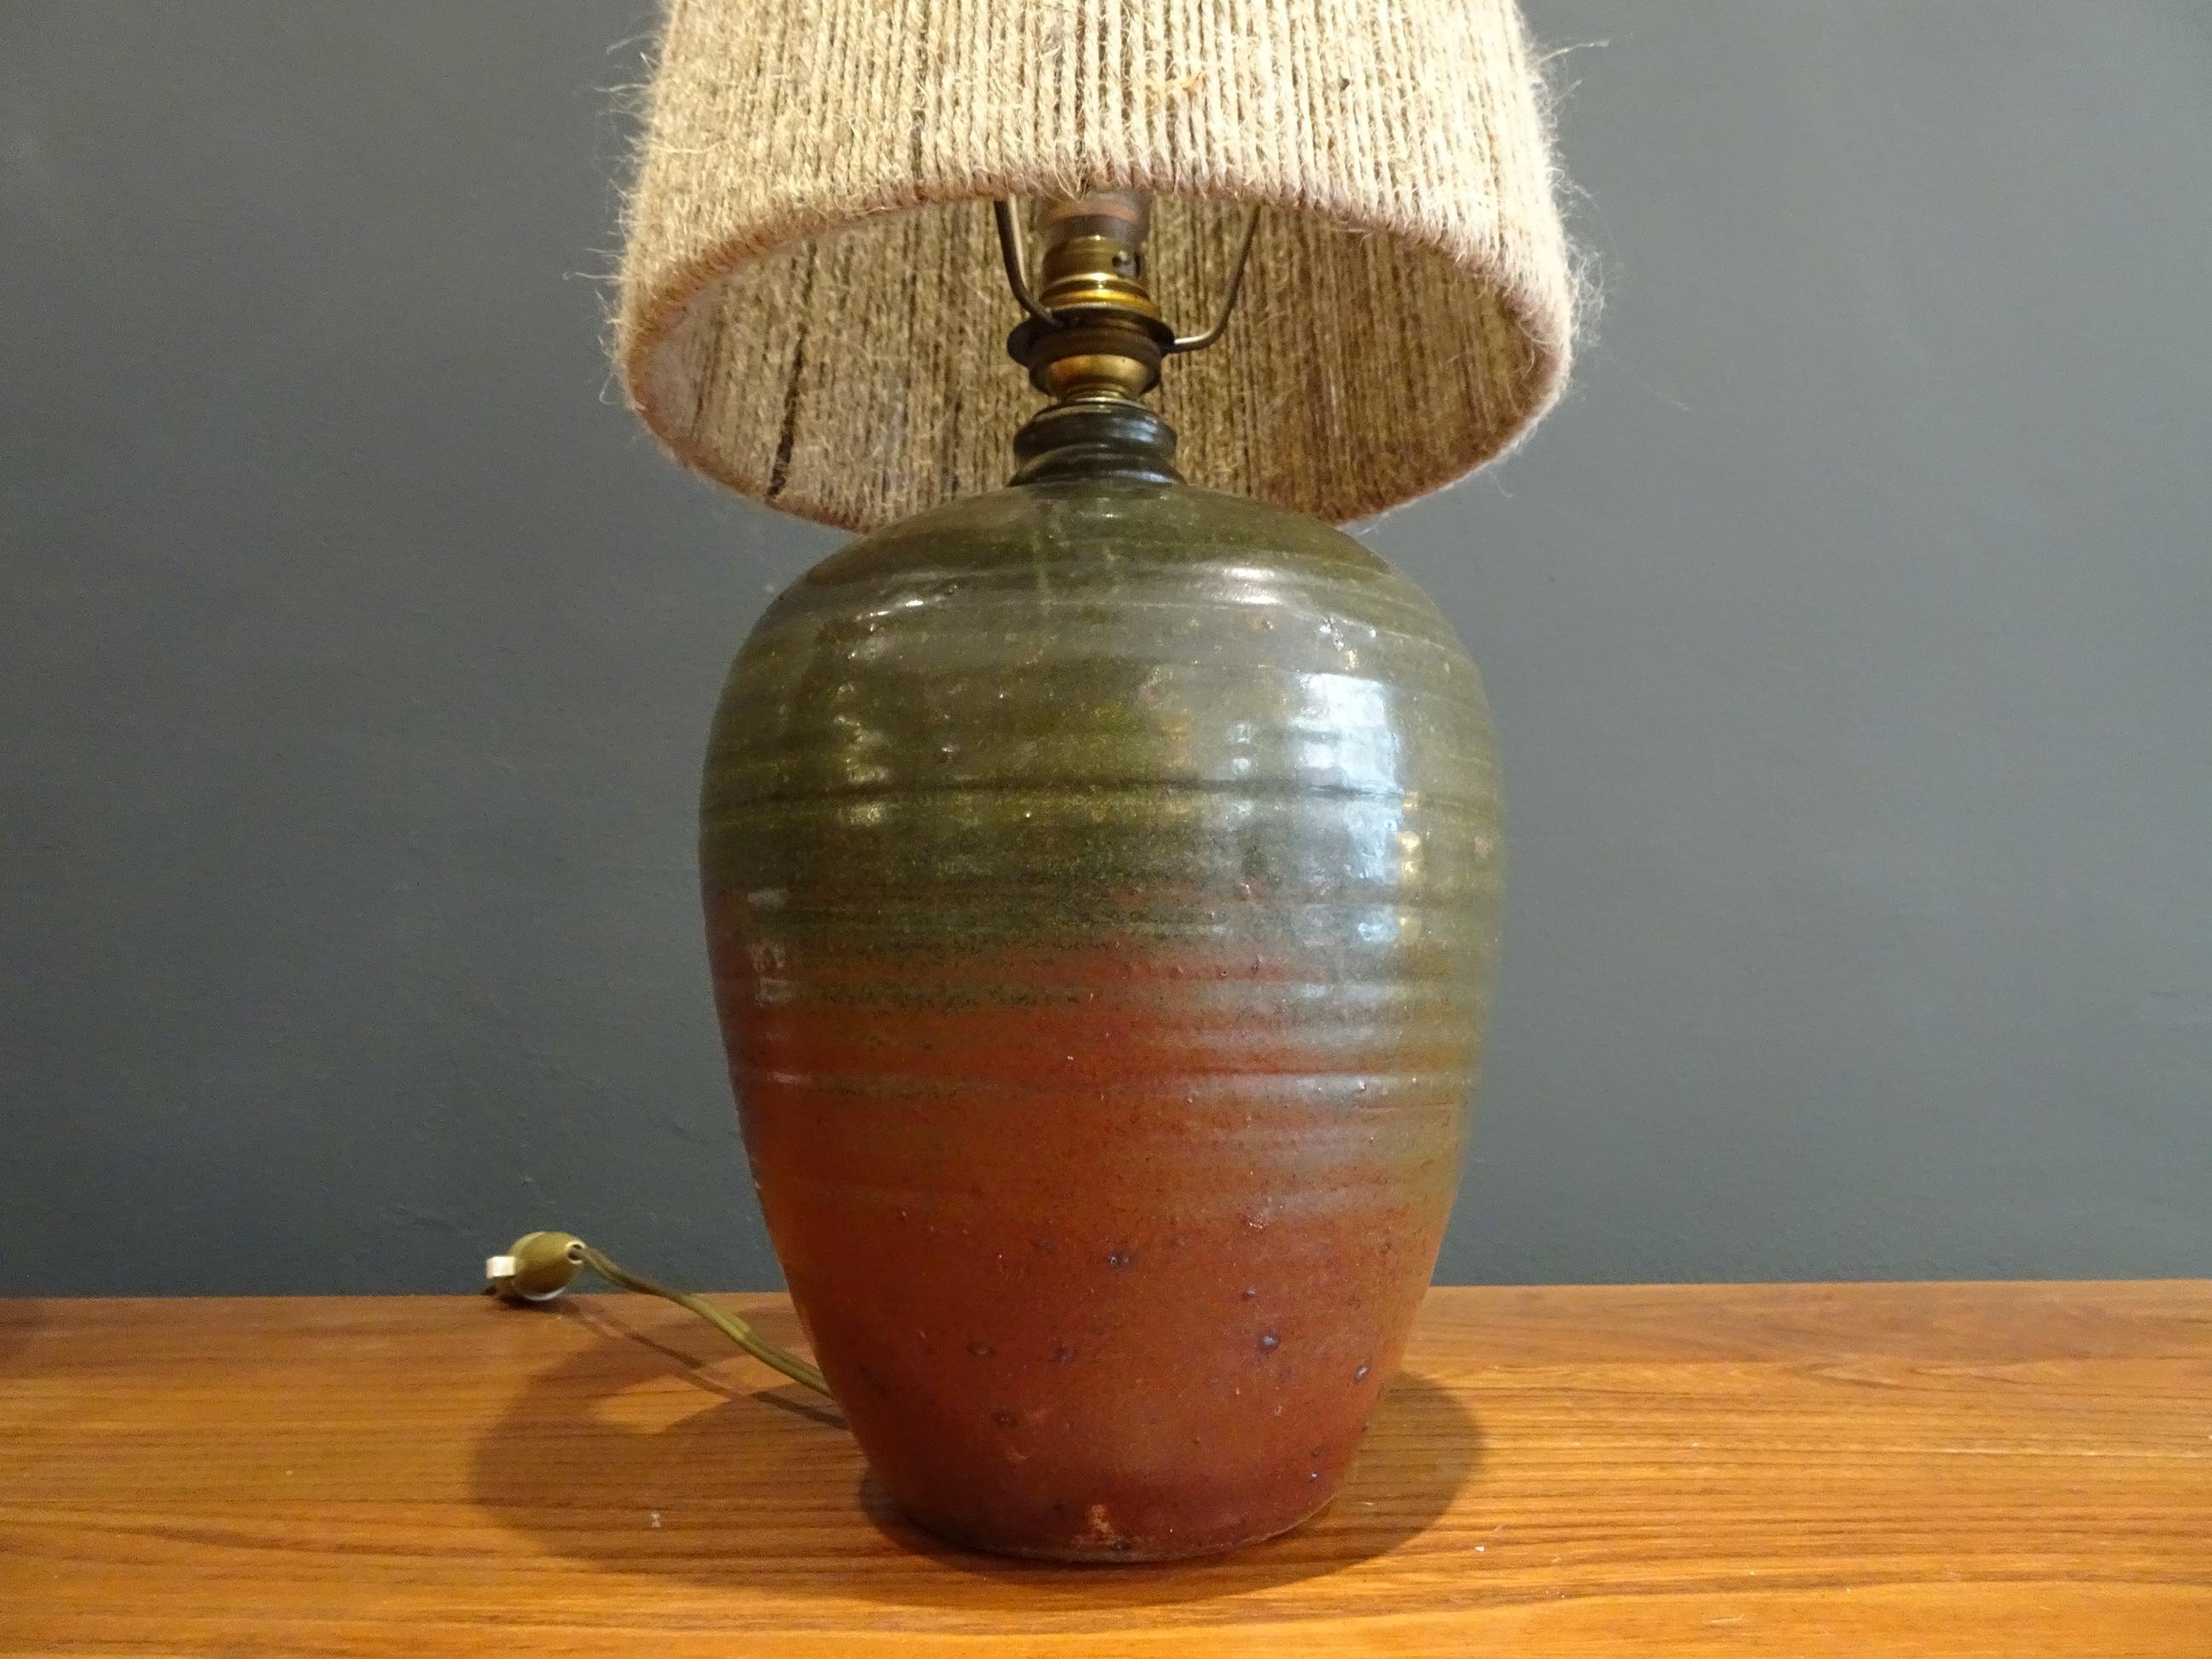 Signed lamp in green and red enameled sandstone and lampshade in light colored cords. 
 
Dimensions: 43cm high, lampshade diameter 15.5cm

Very good condition.